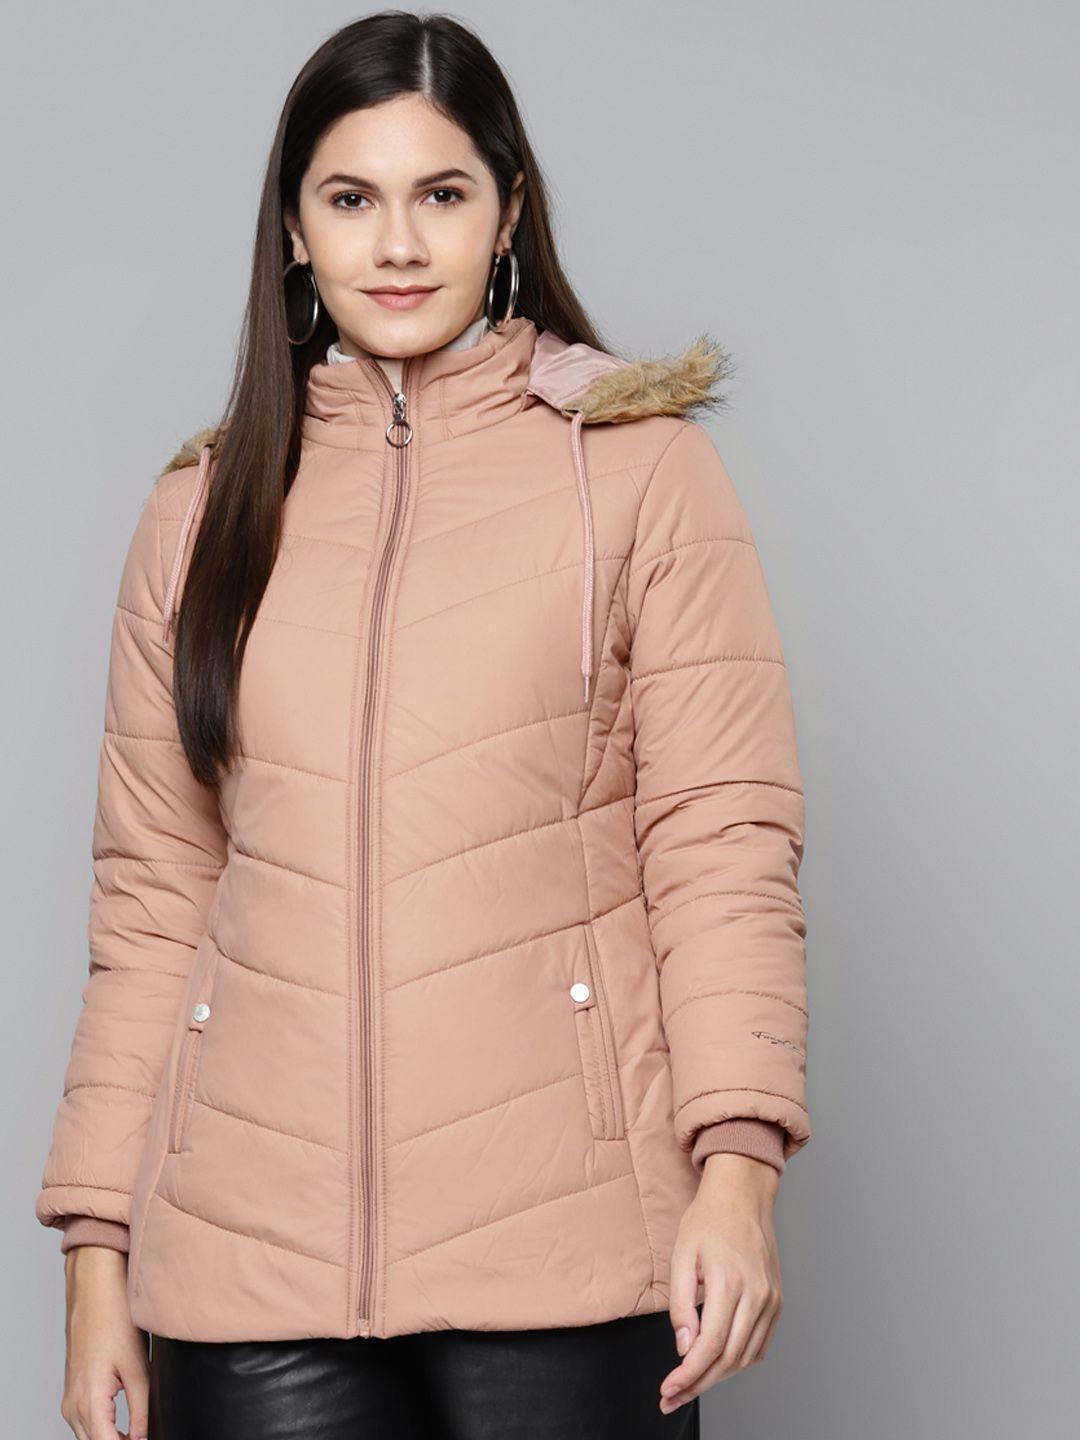 foreign culture by fort collins women peach-coloured hooded parka jacket